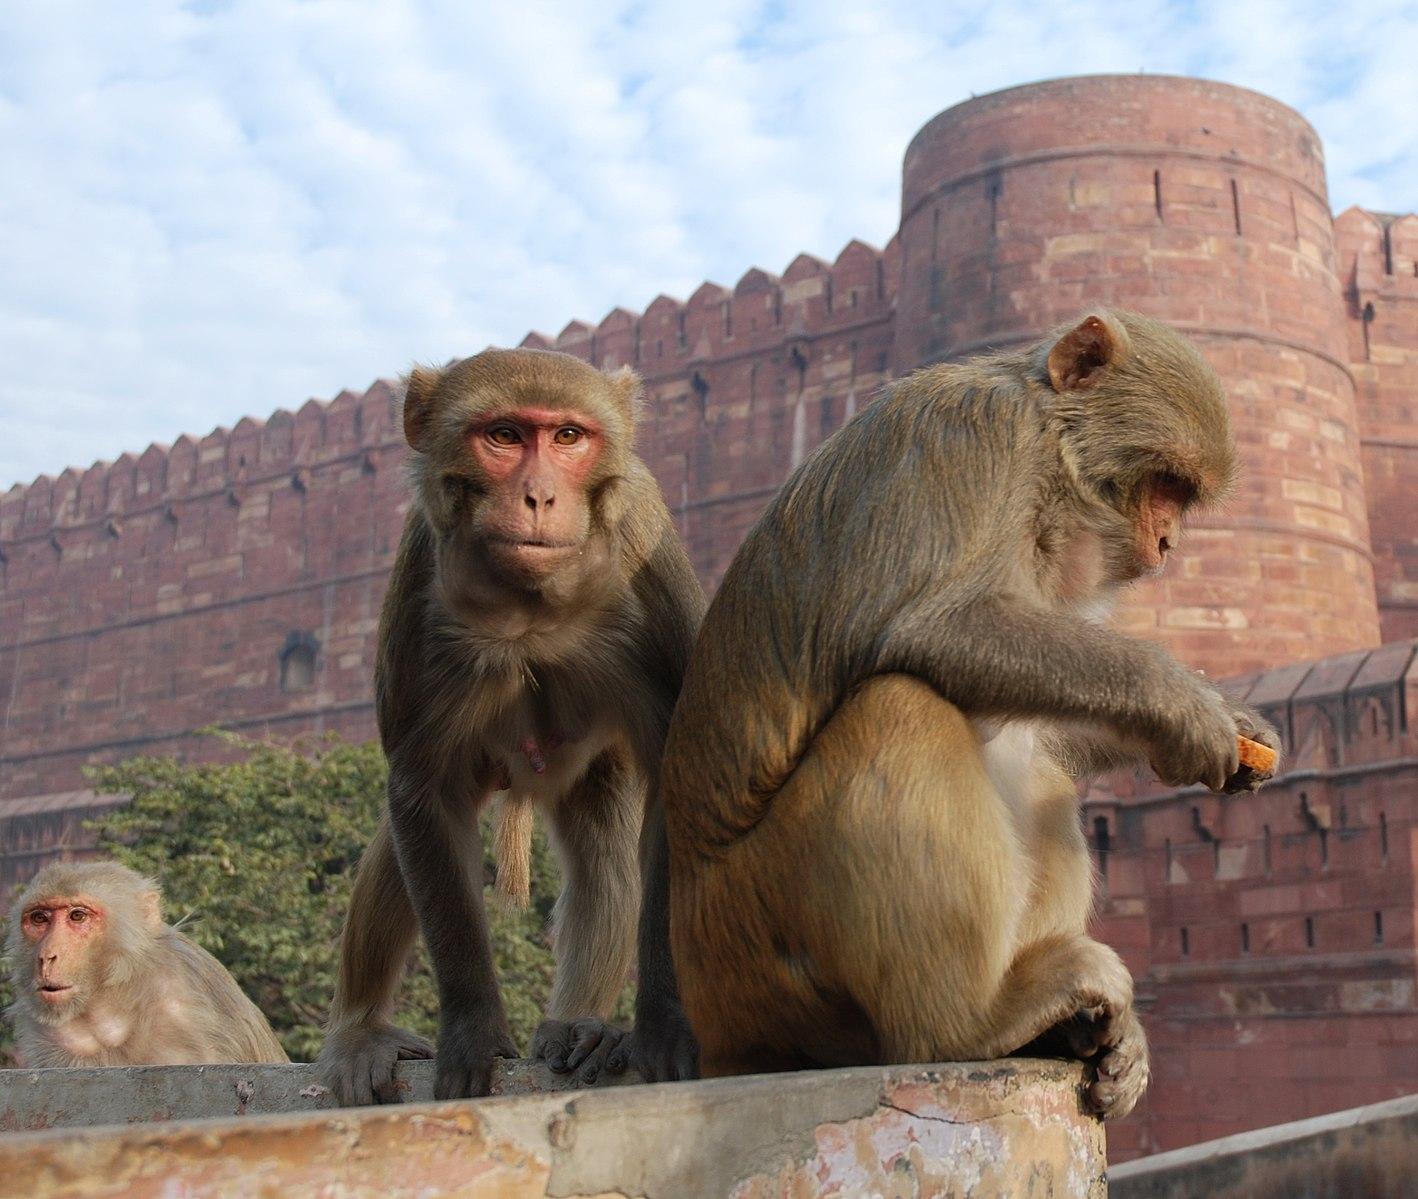 Three macaques outside a temple in India.